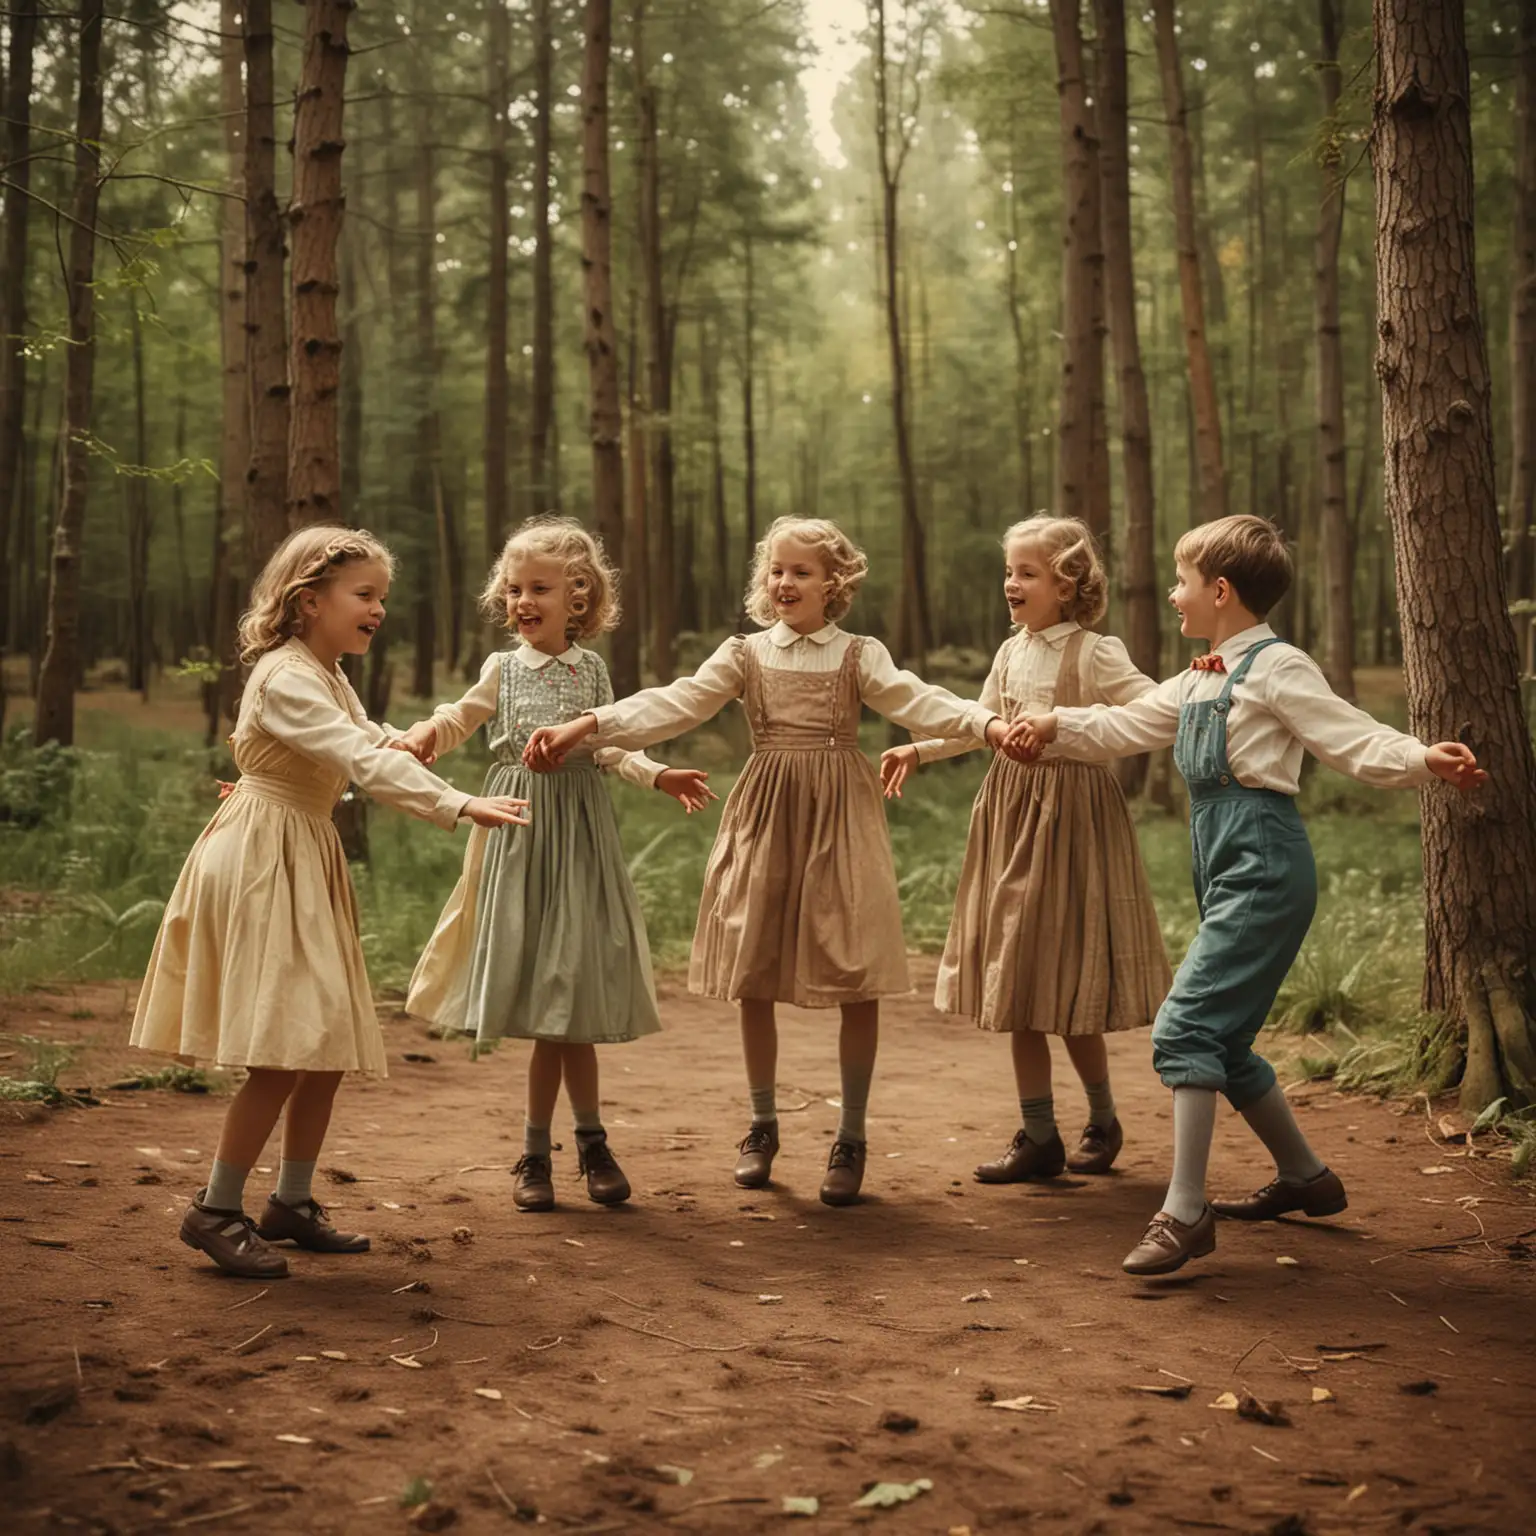 Vintage Children Dancing in a Circle in Forest Setting